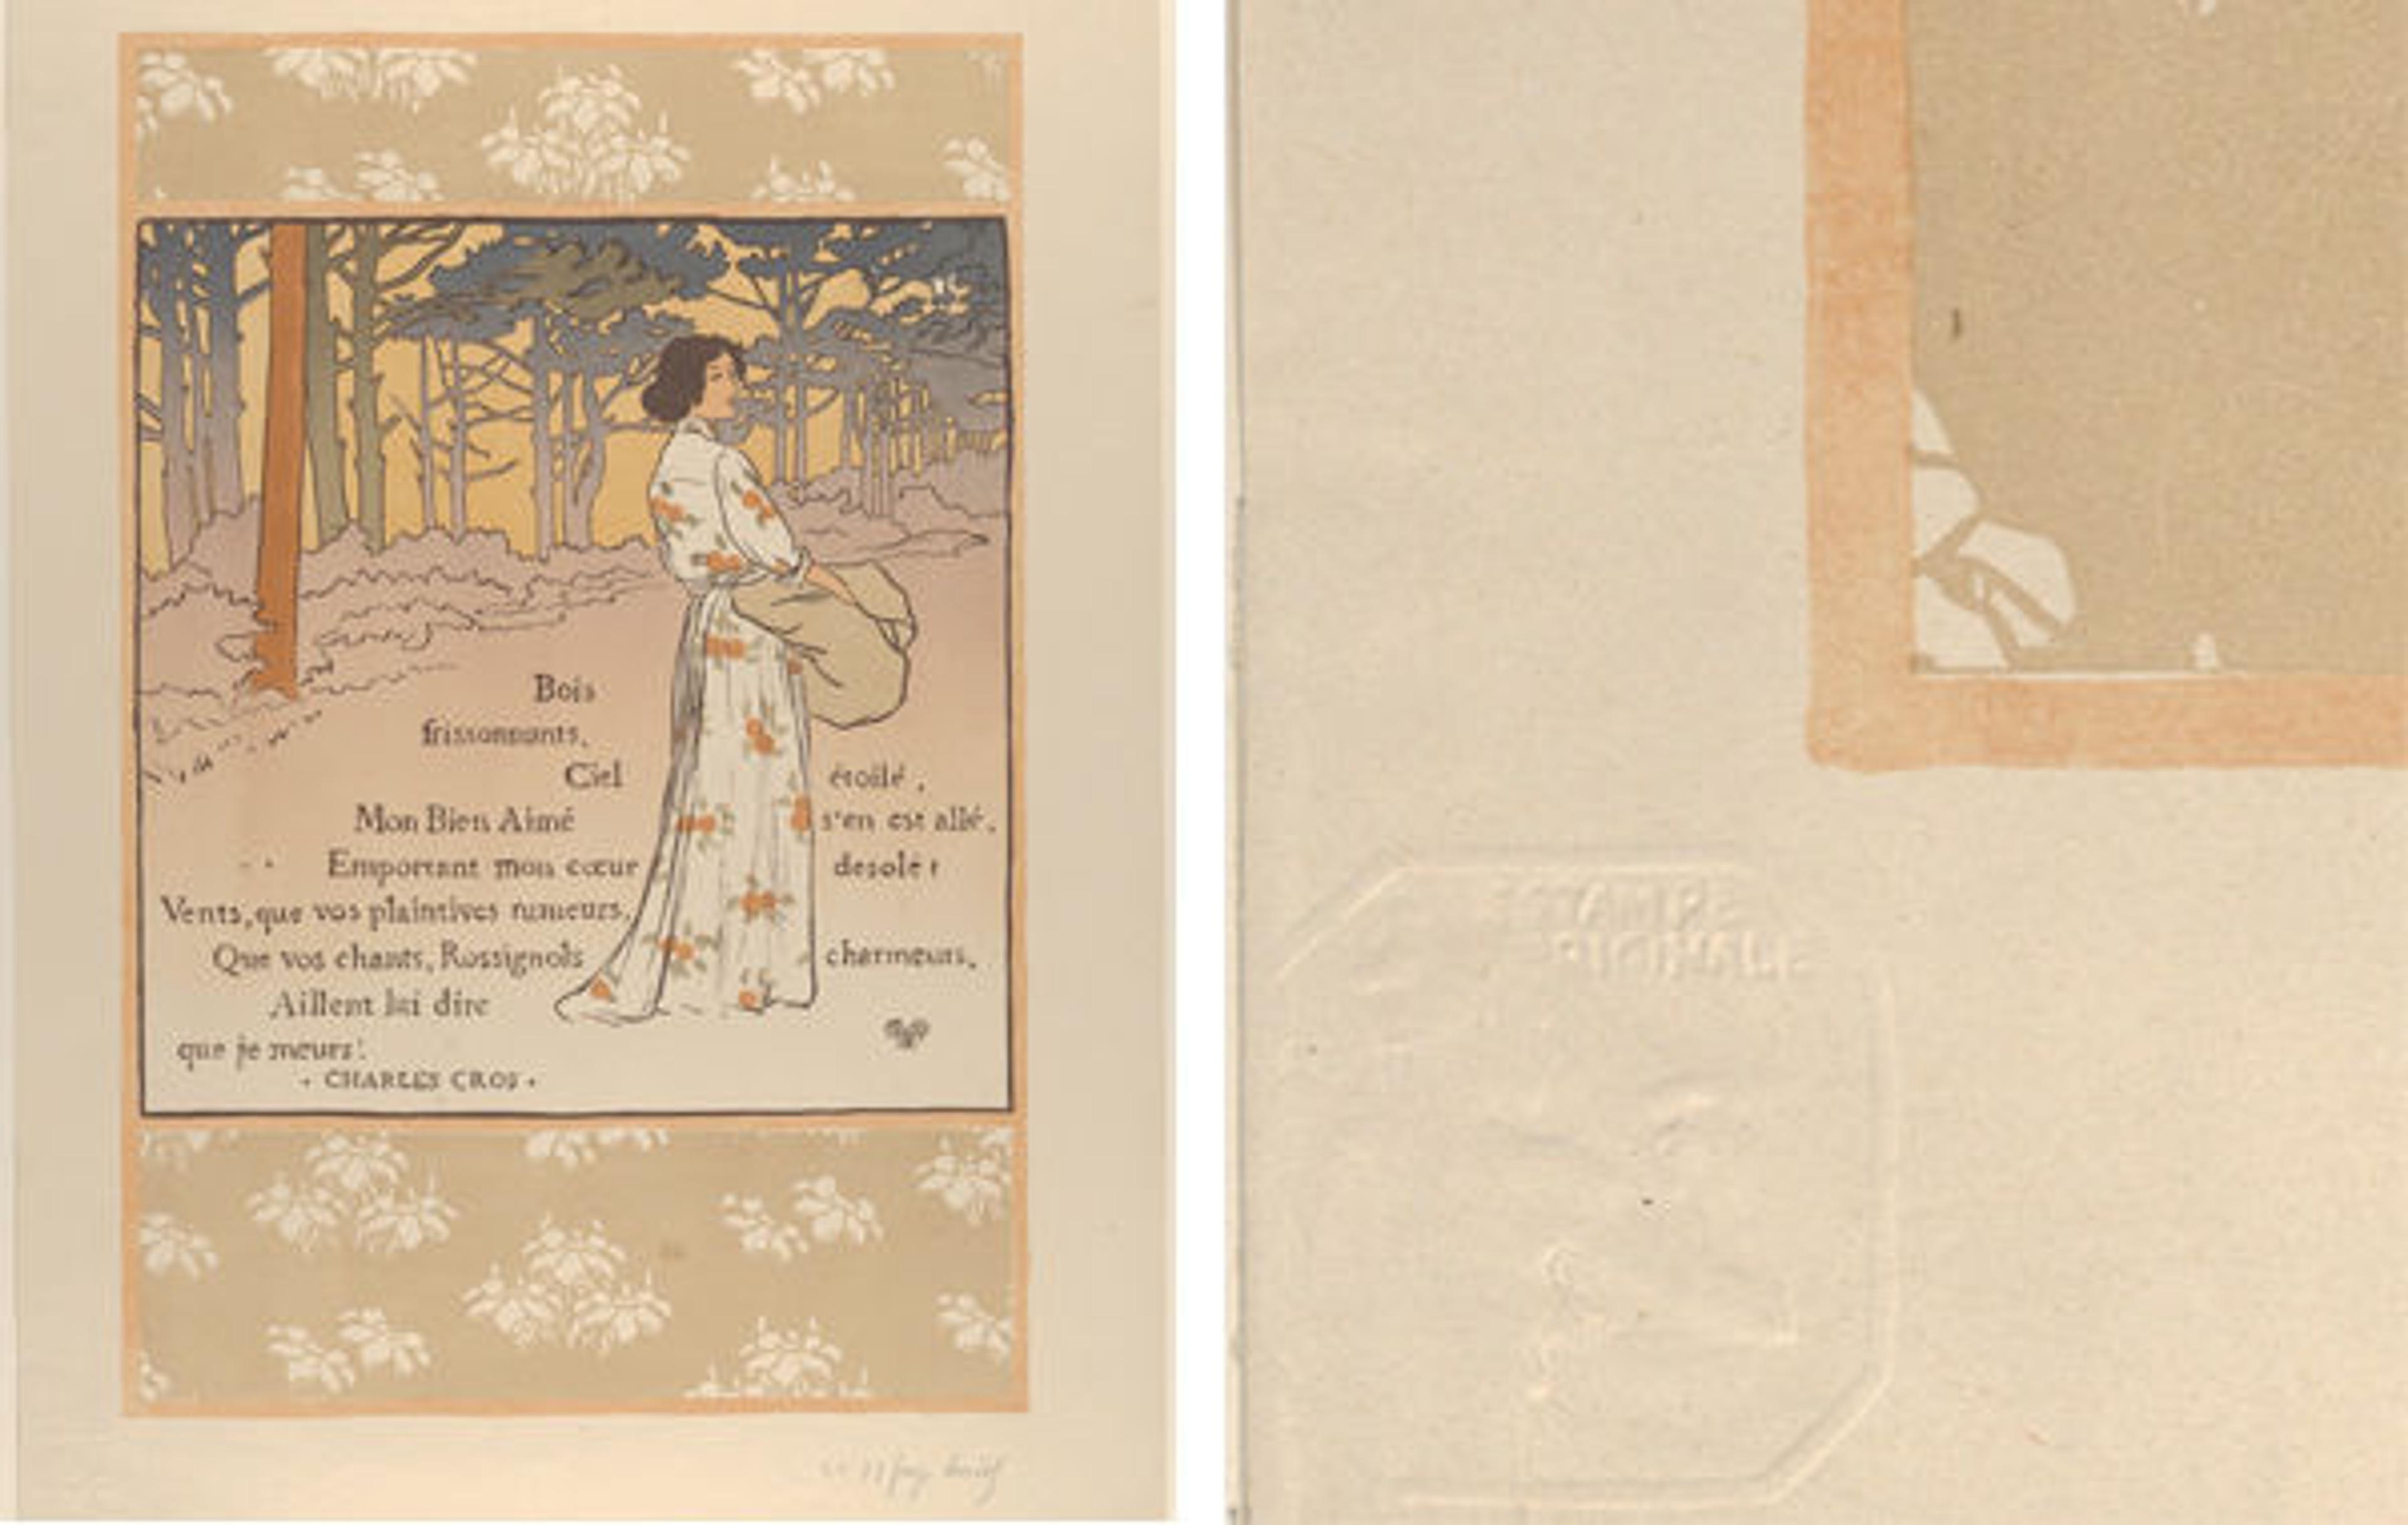 Left: the full print. Right: the blind stamp of L'Estampe Originale.  Trembling Woods (from L'Estampe originale, Album II), 1893. Georges Auriol (French, 1836–1938). Publisher André Marty (French, born 1857). Color lithograph; Image: 19 1/2 × 12 3/4 in. (49.5 × 32.4 cm). Sheet: 22 13/16 × 16 1/8 in. (58 × 41 cm). The Metropolitan Museum of Art, New York, Rogers Fund, 1922 (22.82.1-11) 